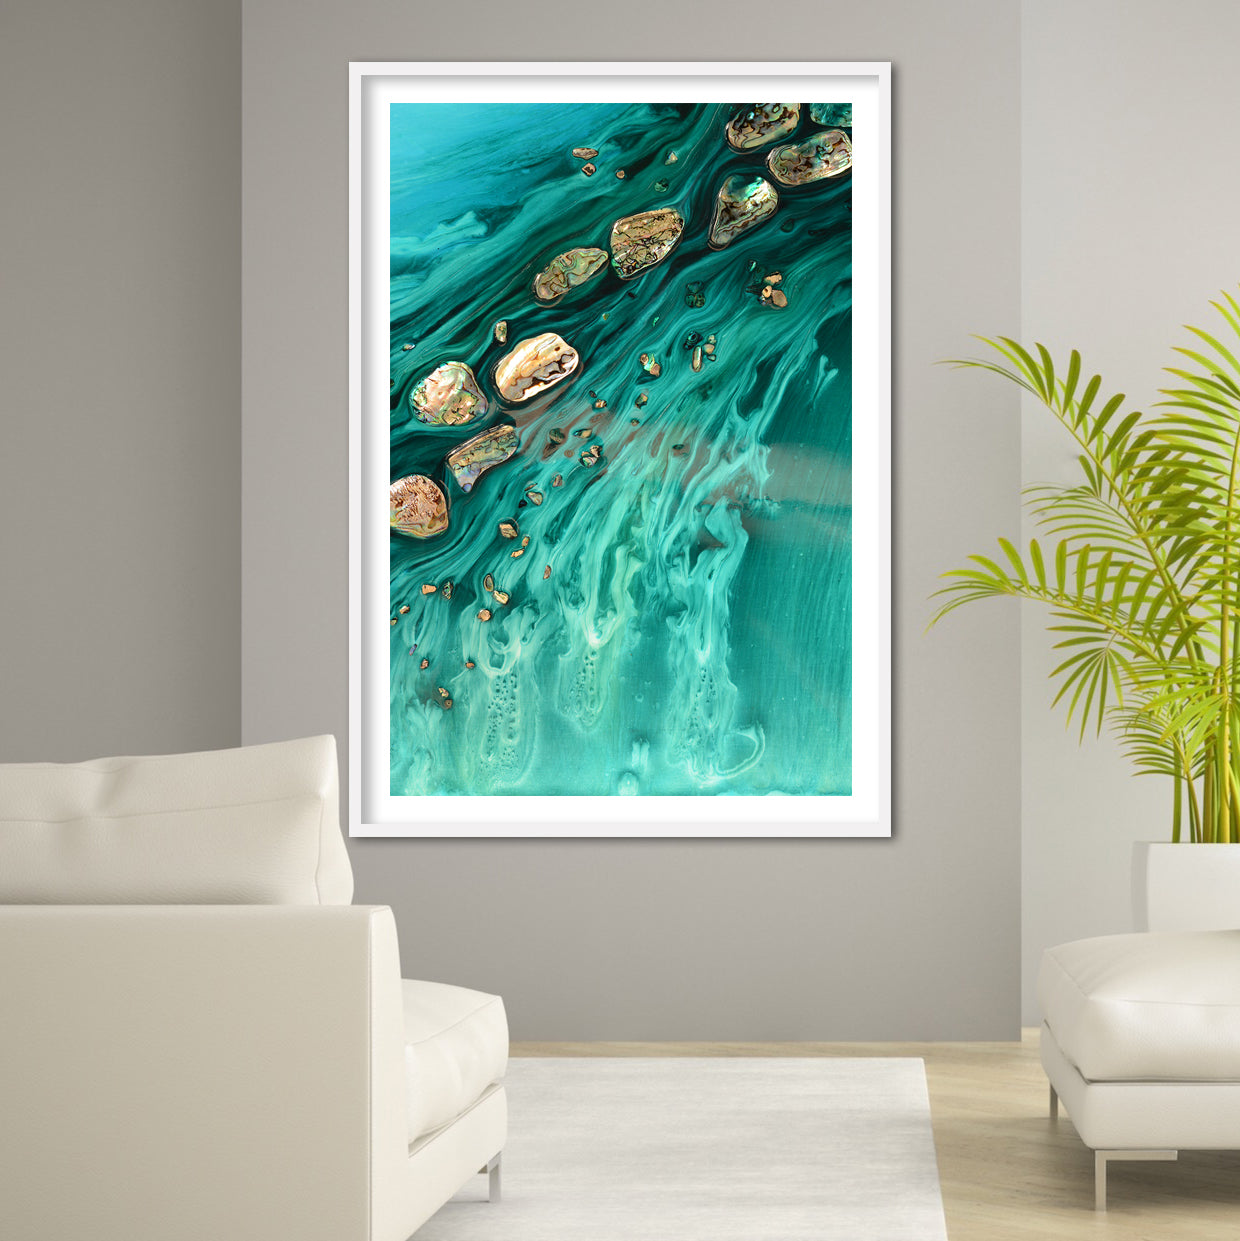 Abstract Ocean Artwork. Rise Above Seashells 1. Art Print. Antuanelle 3 Limited Edition Print